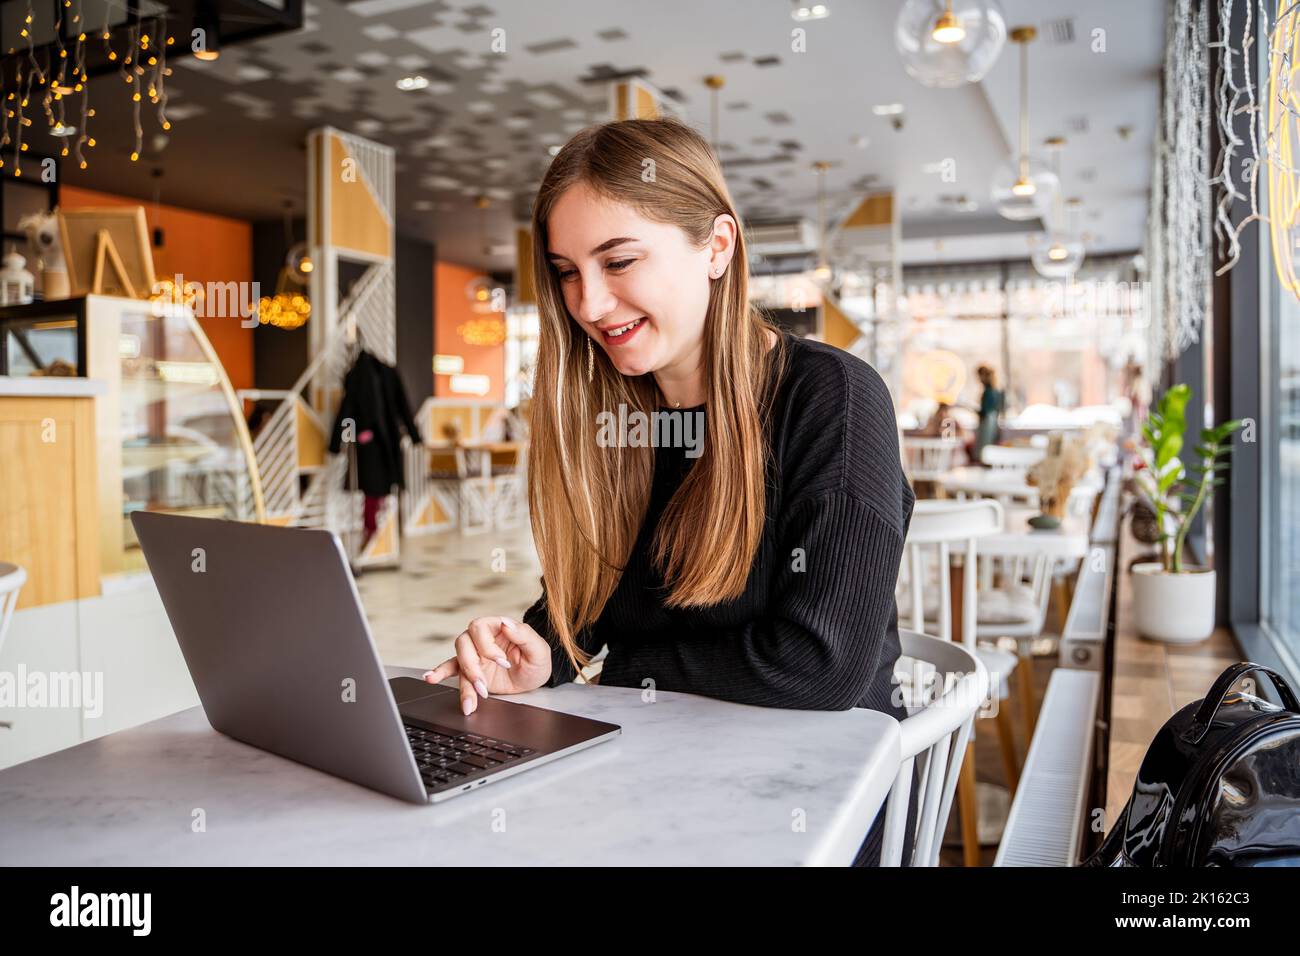 young girl in a cafe sitting at a laptop Stock Photo